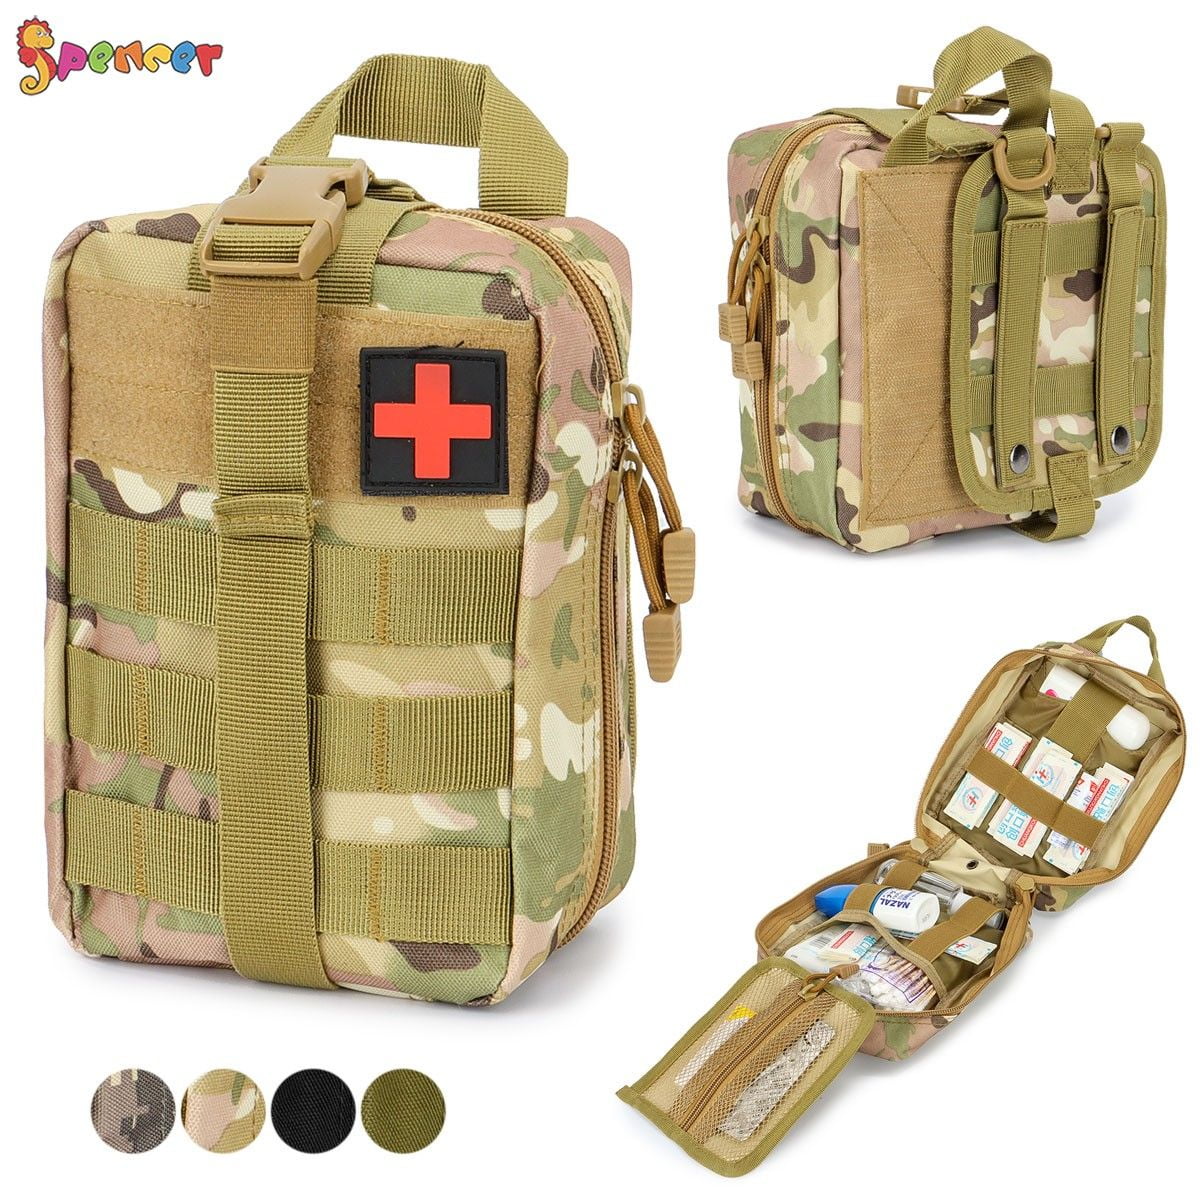 Body Armour Canada Bullet & Cut Resistant Products - EMS/EMT Trauma Kit